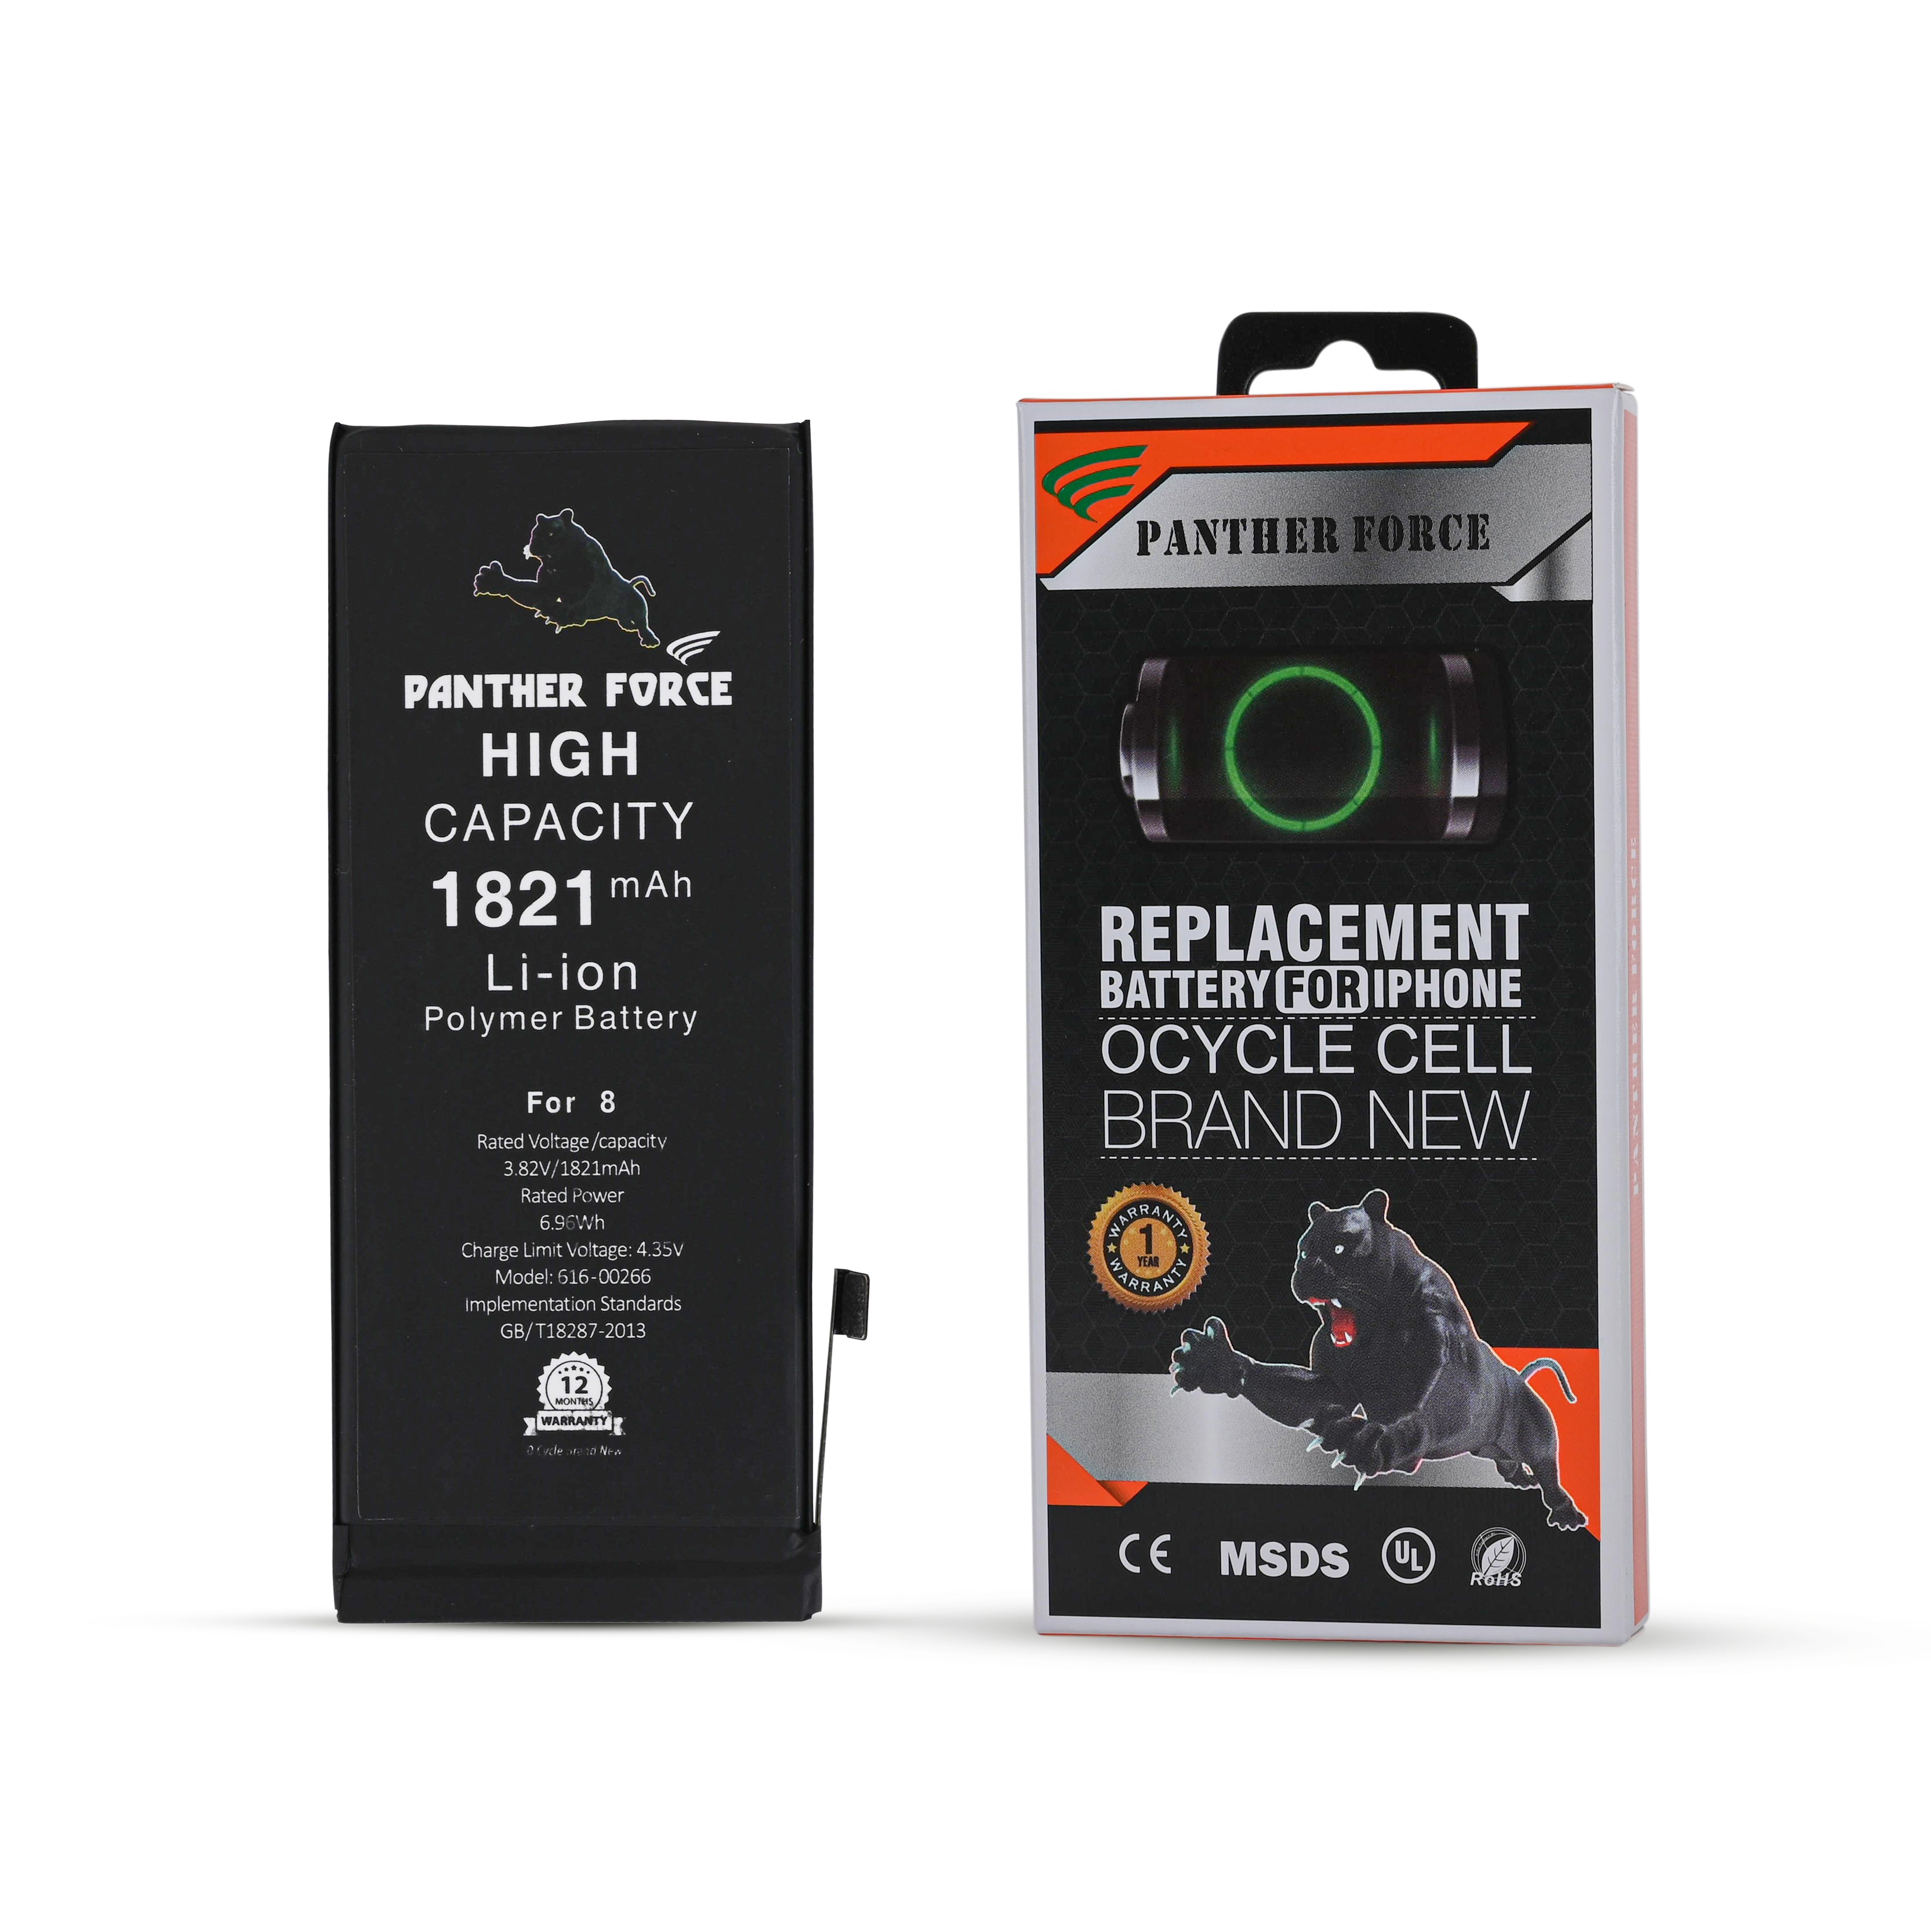 GENUINE PANTHER FORCE® REPLACEMENT BATTERY FOR APPLE iPHONE 8– 1821 mAh